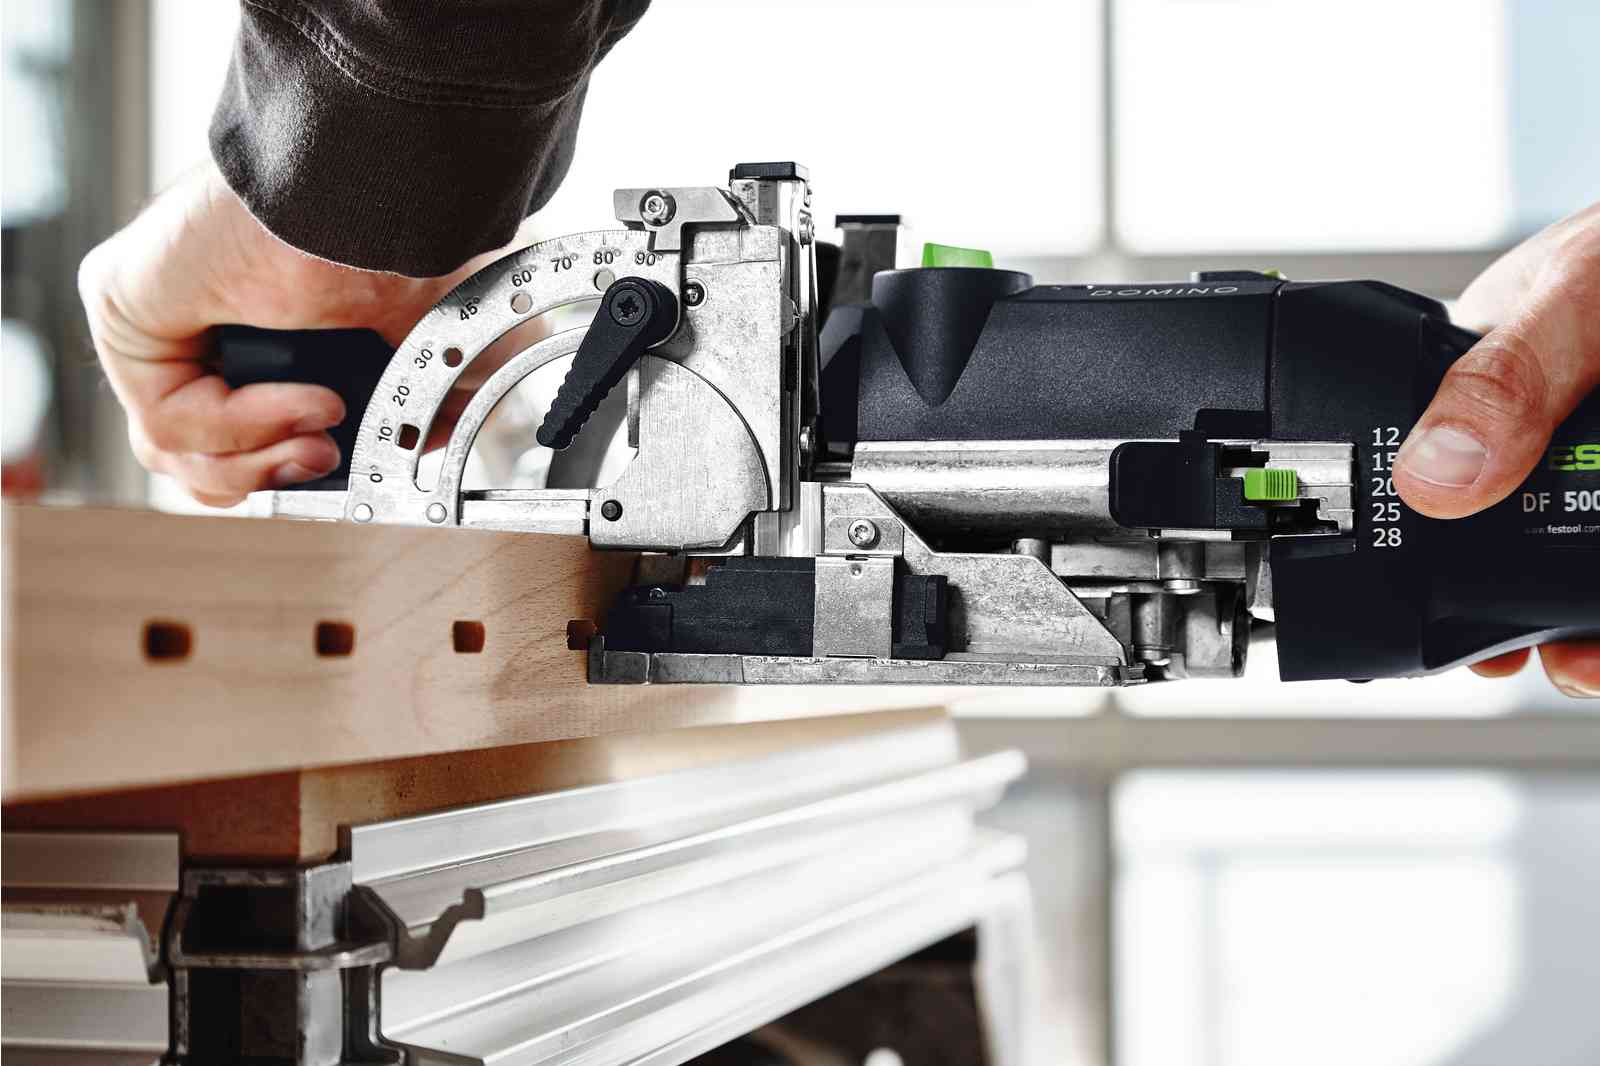 Festool Power Tools for Construction & Remodeling